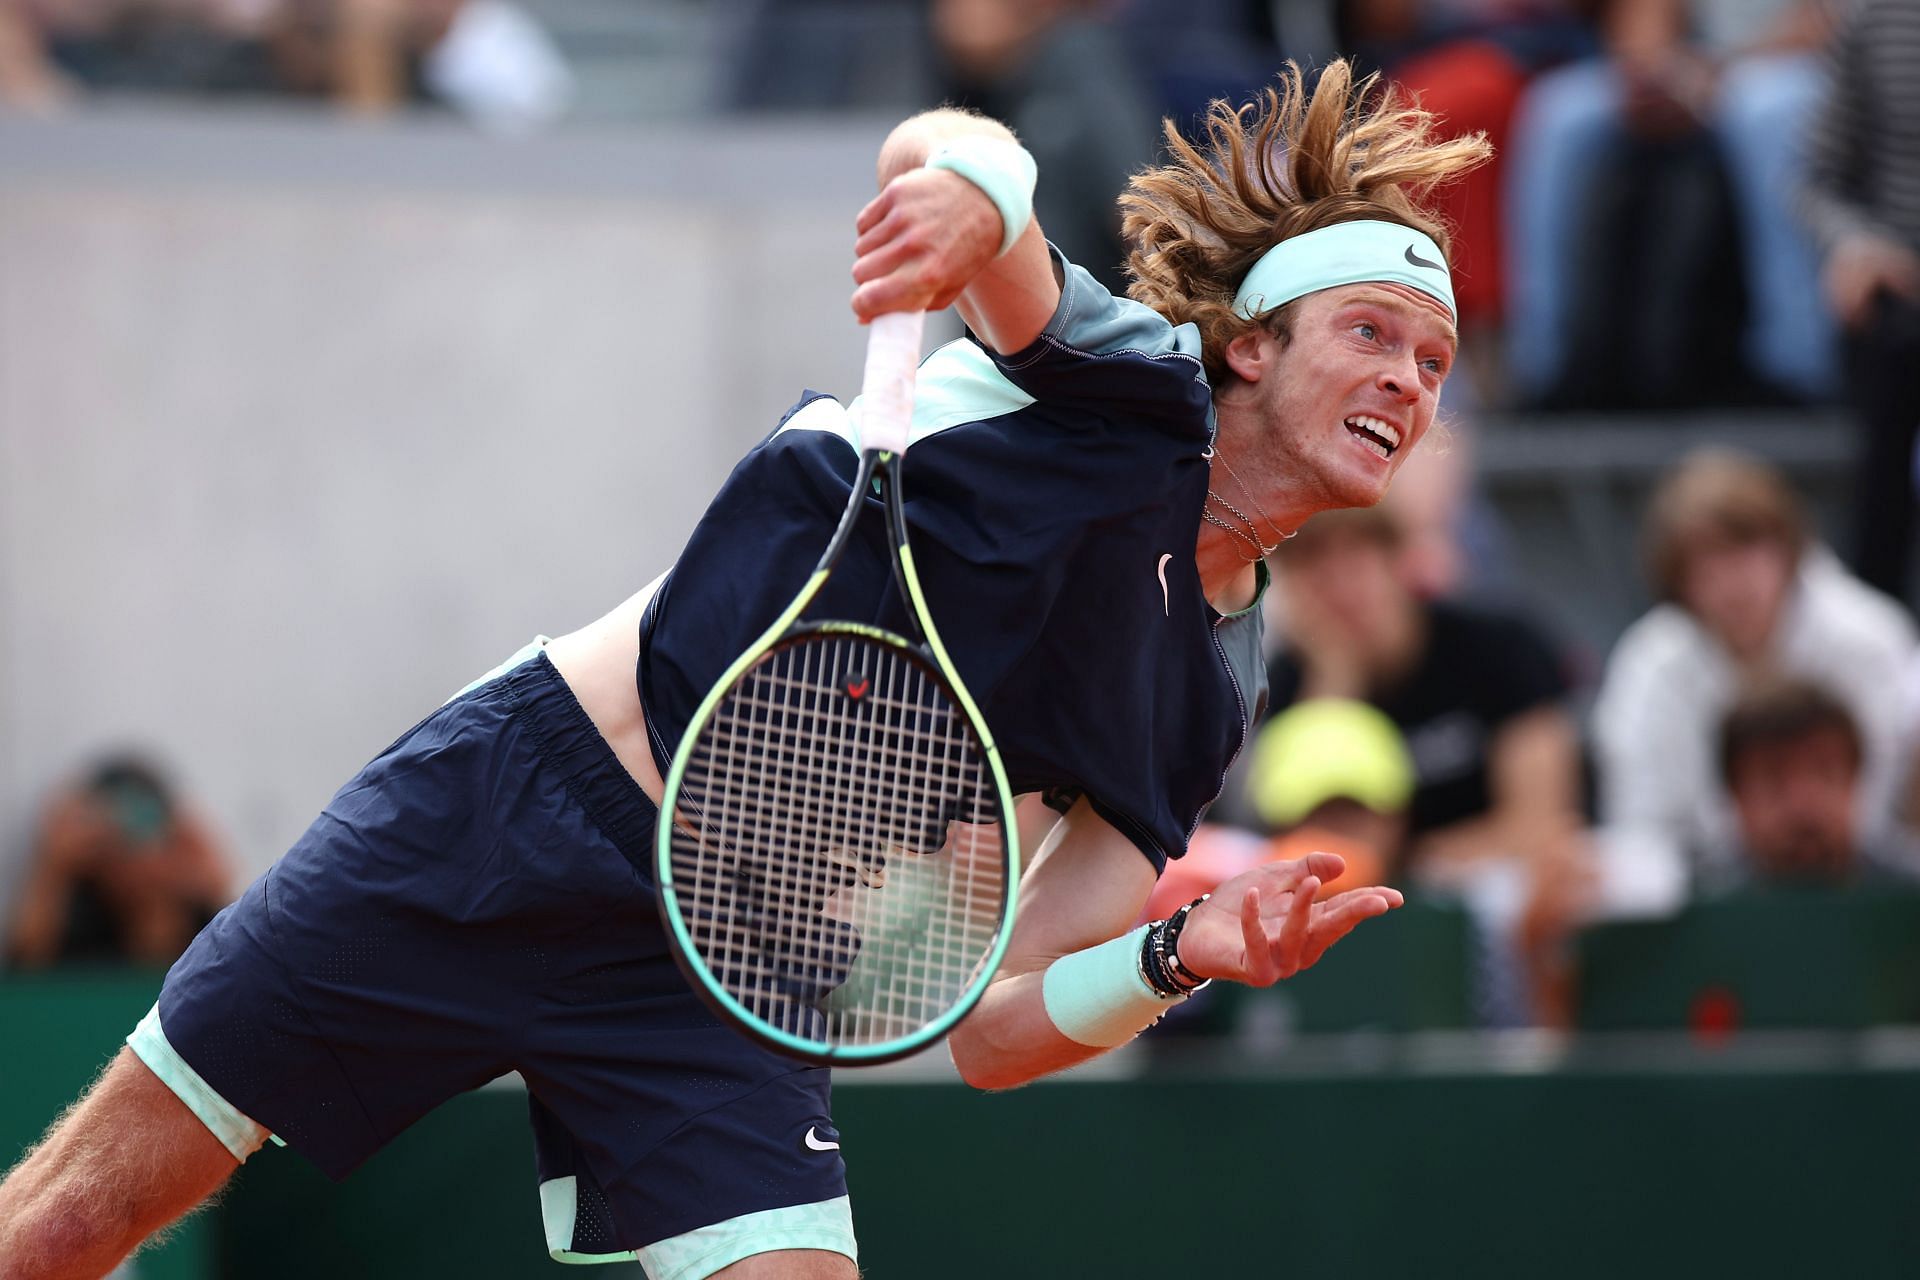 French Open 2022 Andrey Rublev vs Federico Delbonis preview, headto